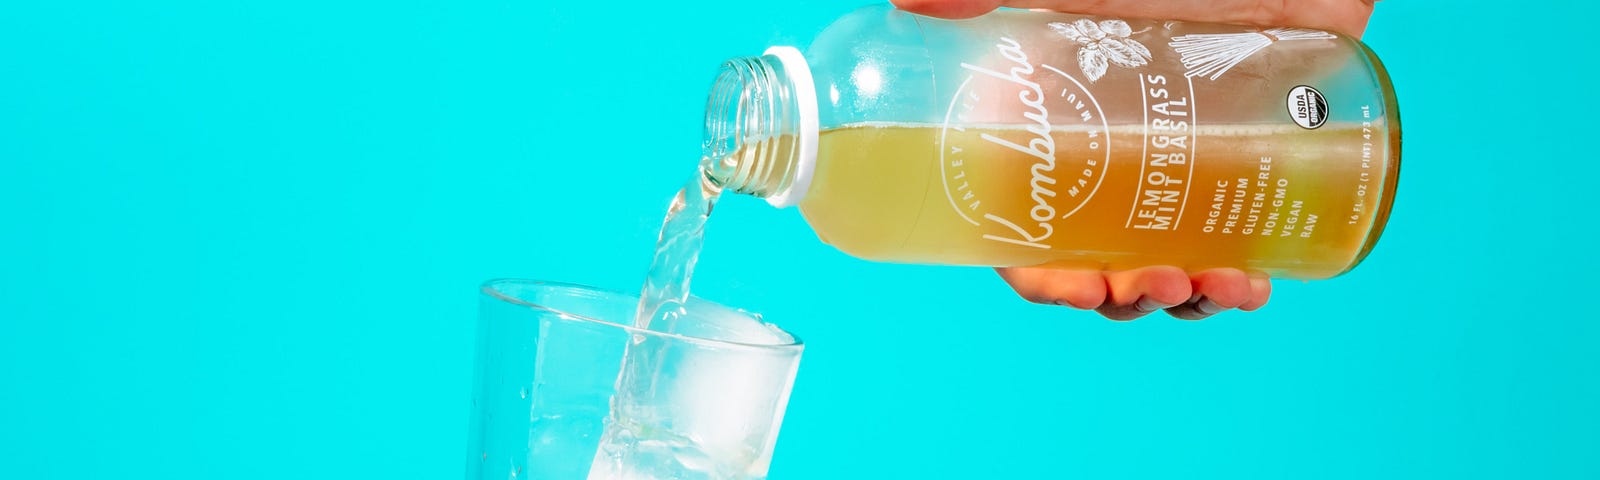 A hand extends from the right to pour kombucha from a glass bottle into a drinking glass (with ice). Kombucha decreases blood sugar for those with type 2 diabetes.